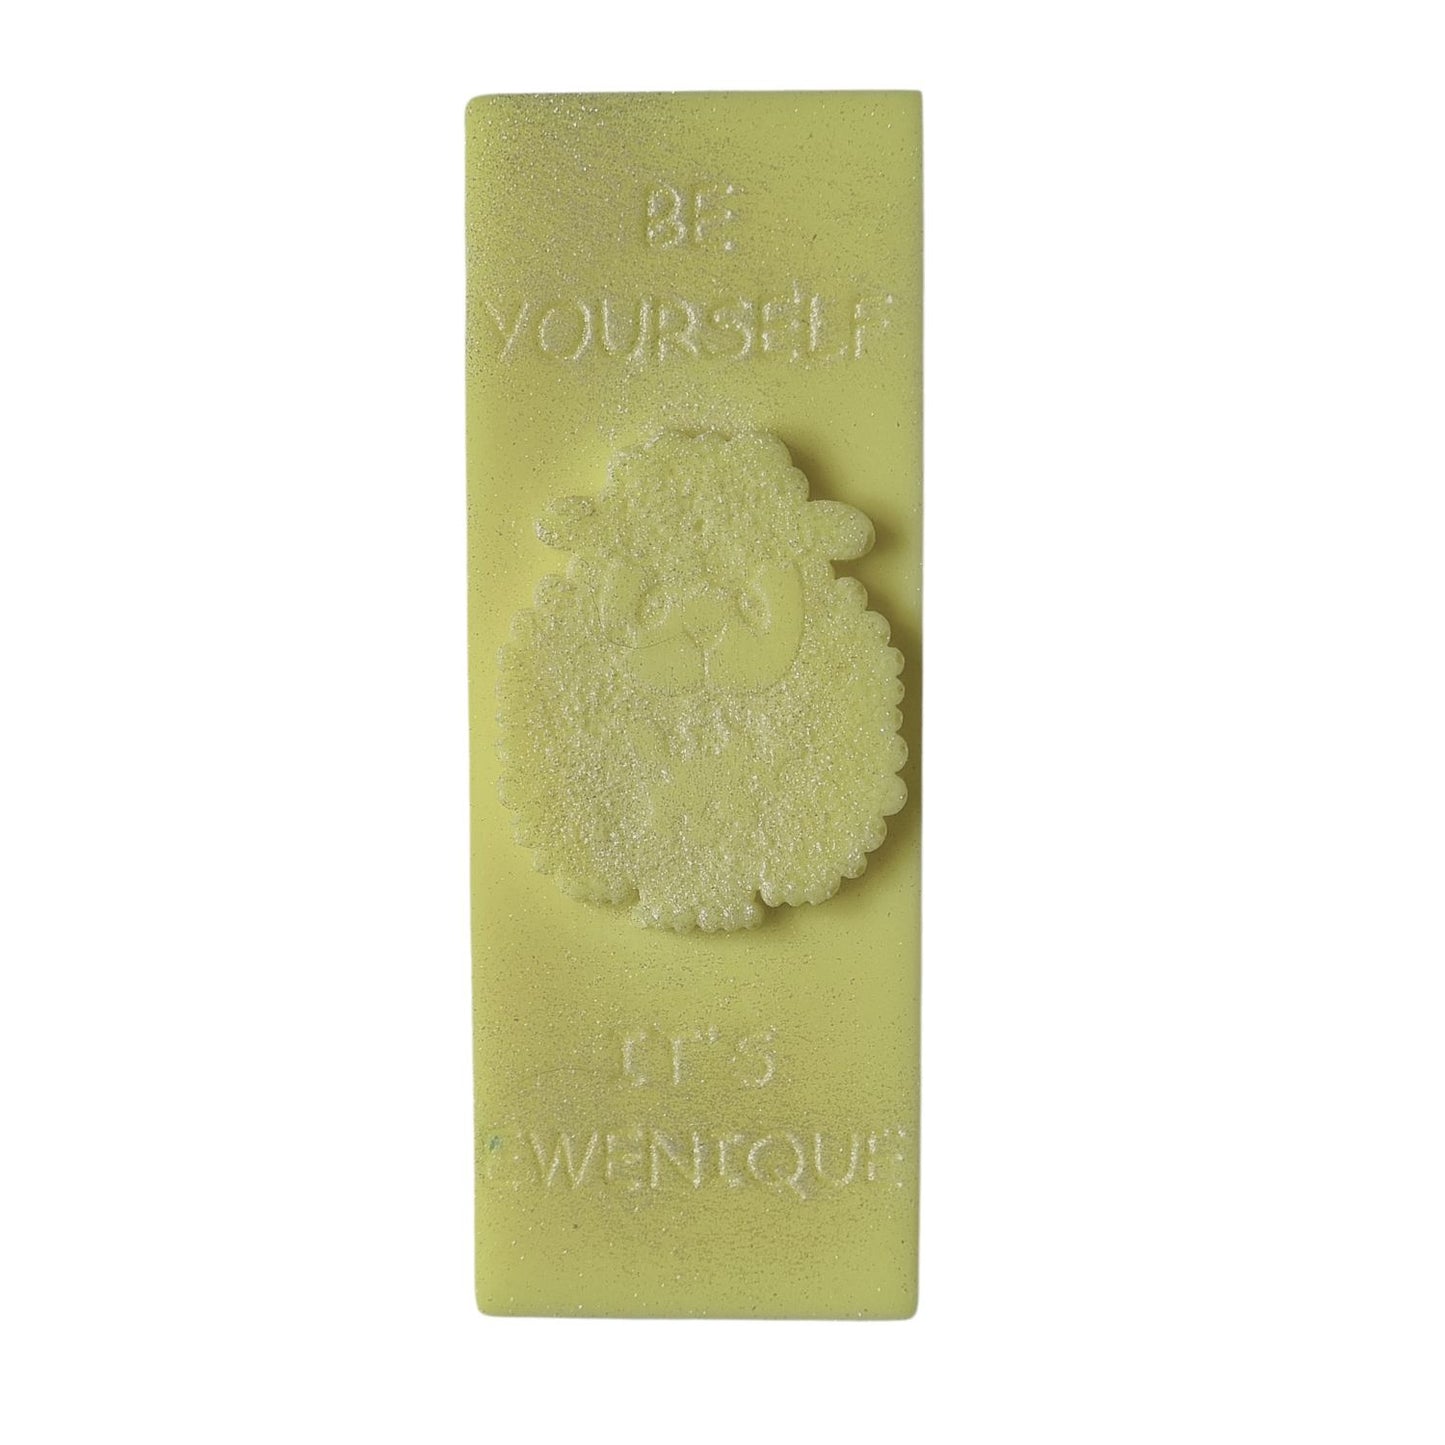 A bright yellow coloured wax melt bar with a raised sheep design with the writing be yourself above and it's ewenique below.